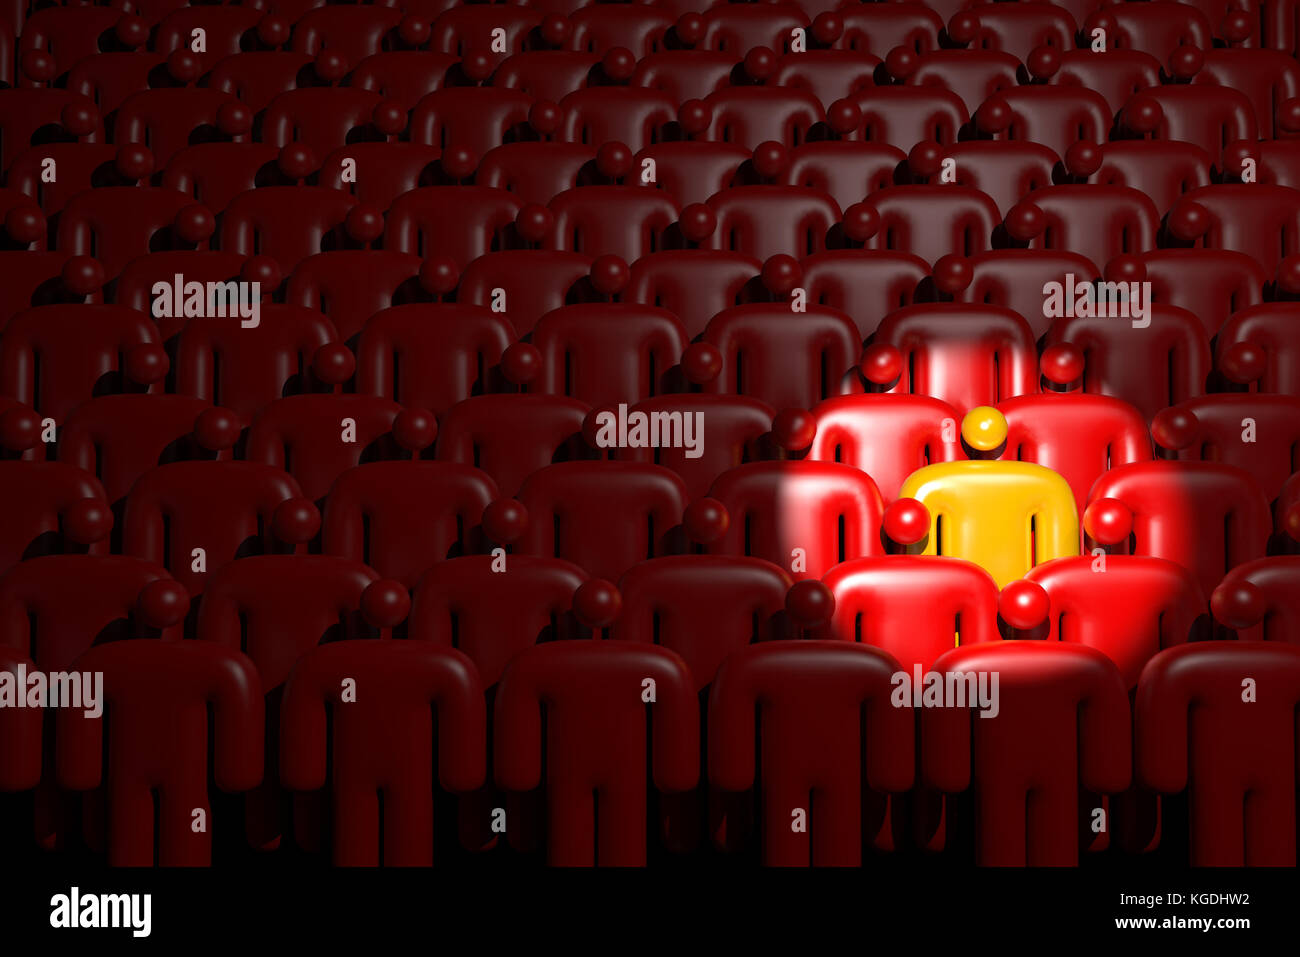 A yellow figure standing out against a red figures crowd. Standout in the crowd. Stock Photo